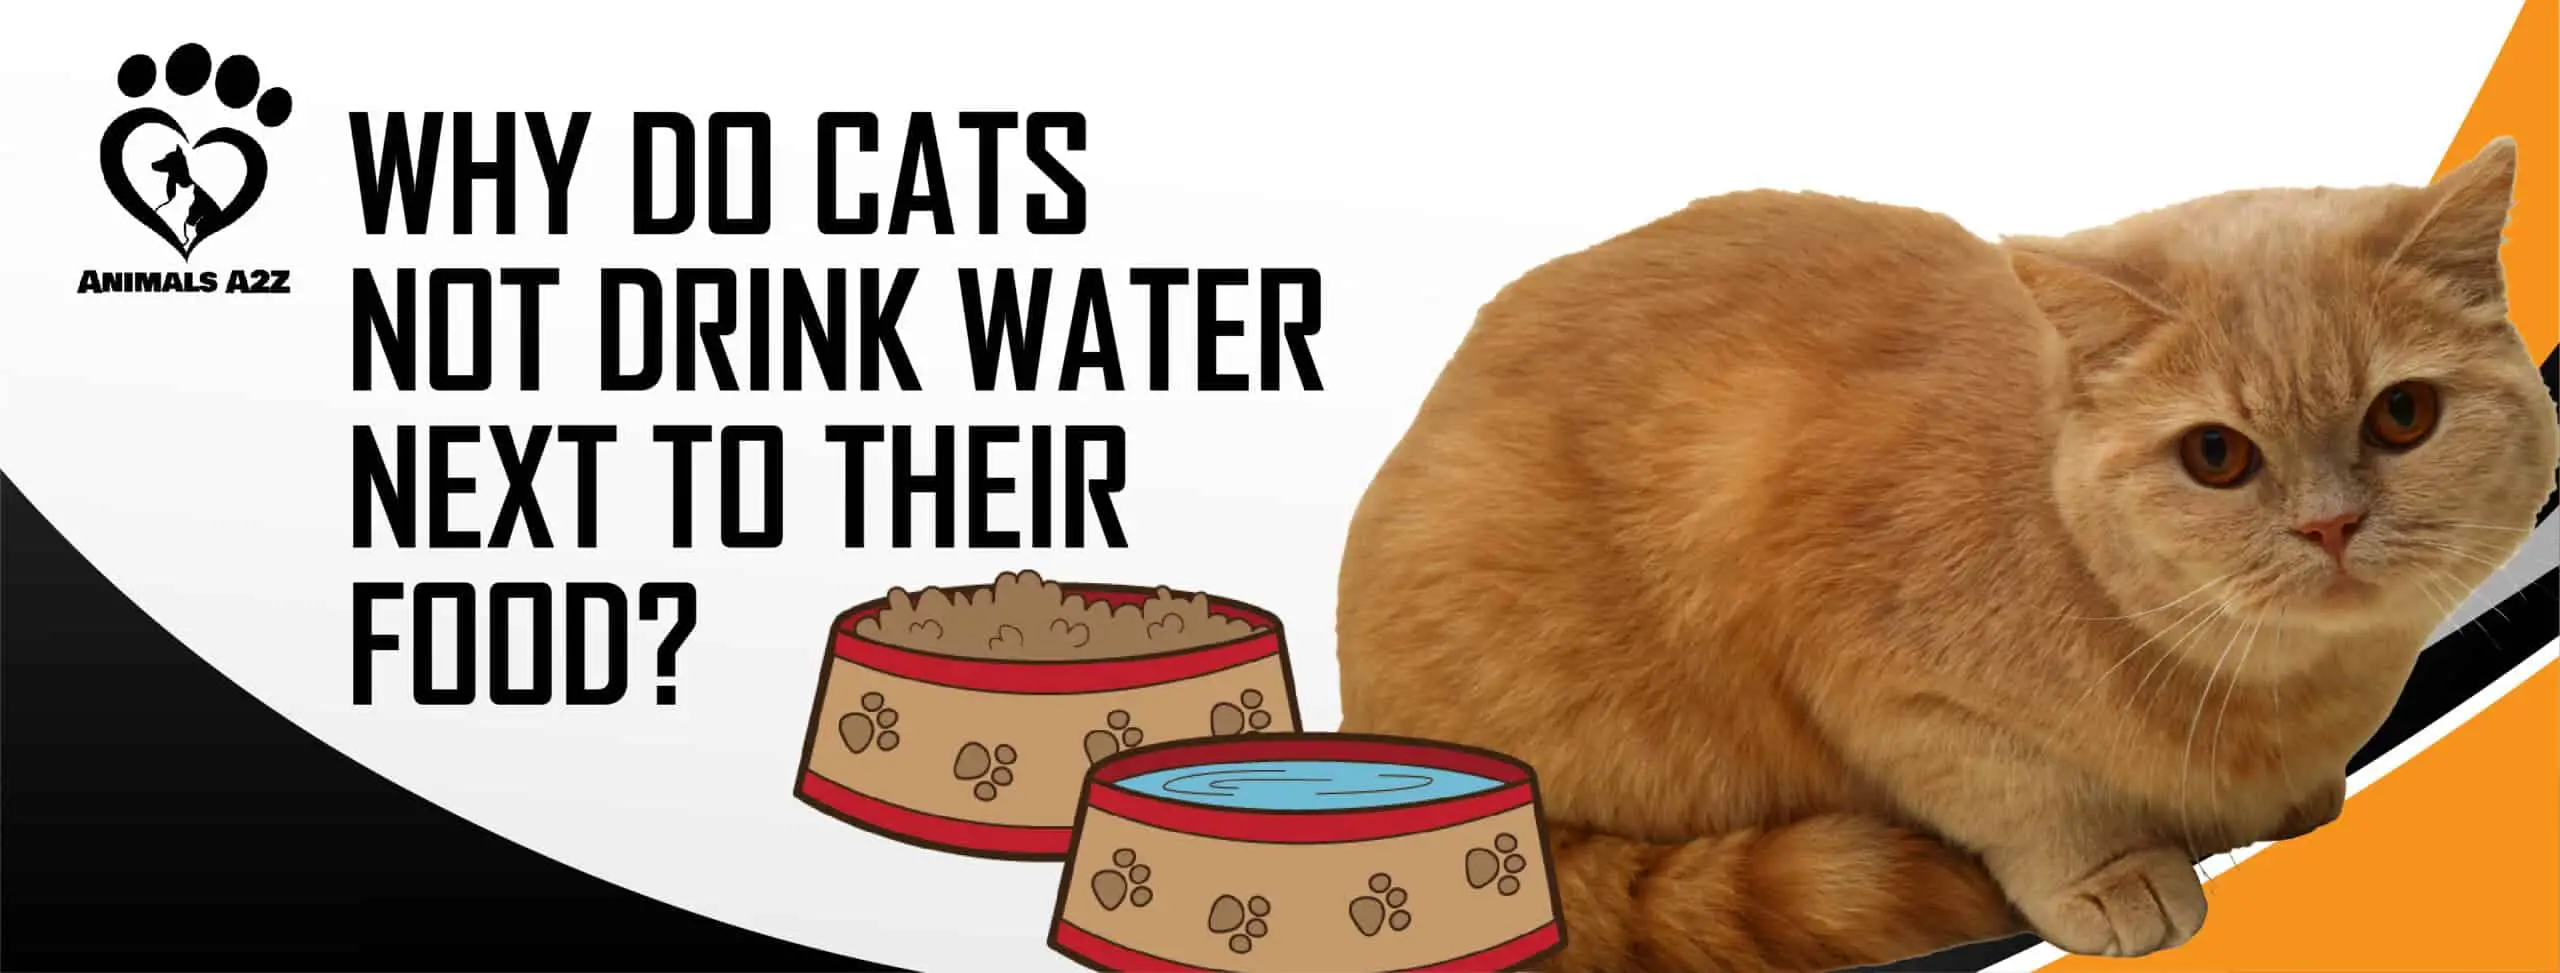 Why do cats not drink water next to their food